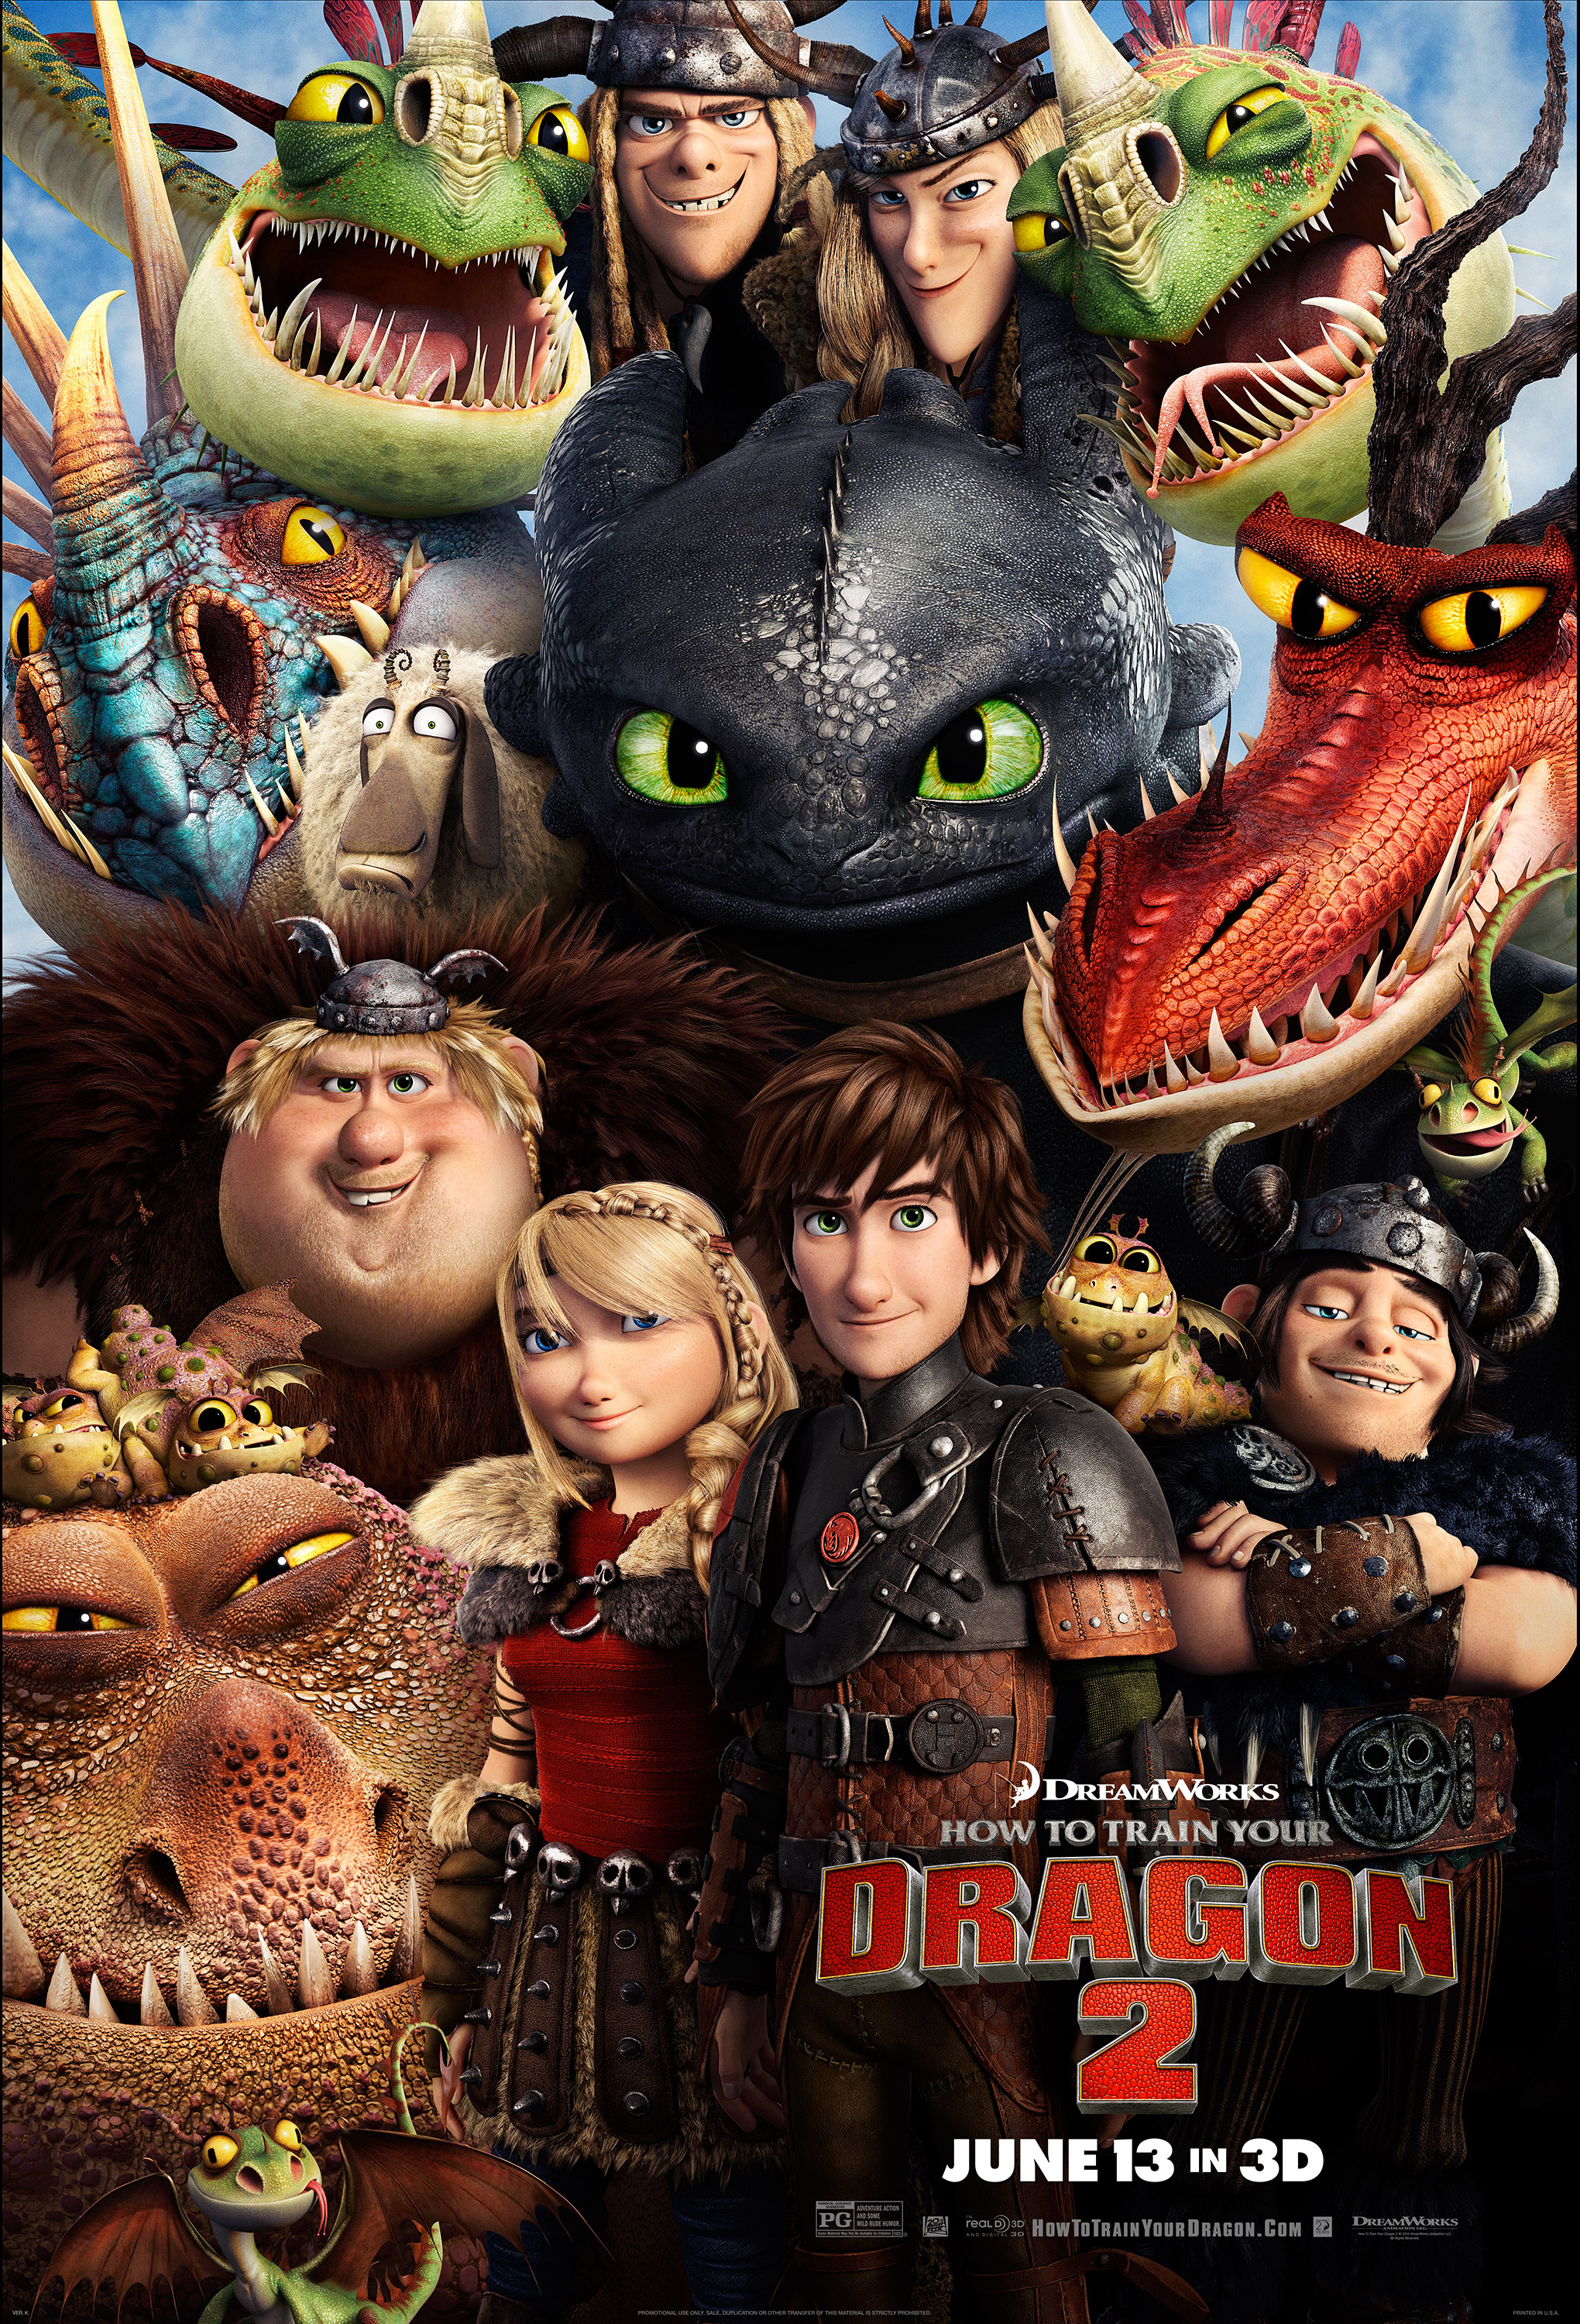 How To Train Your Dragon 2 #7